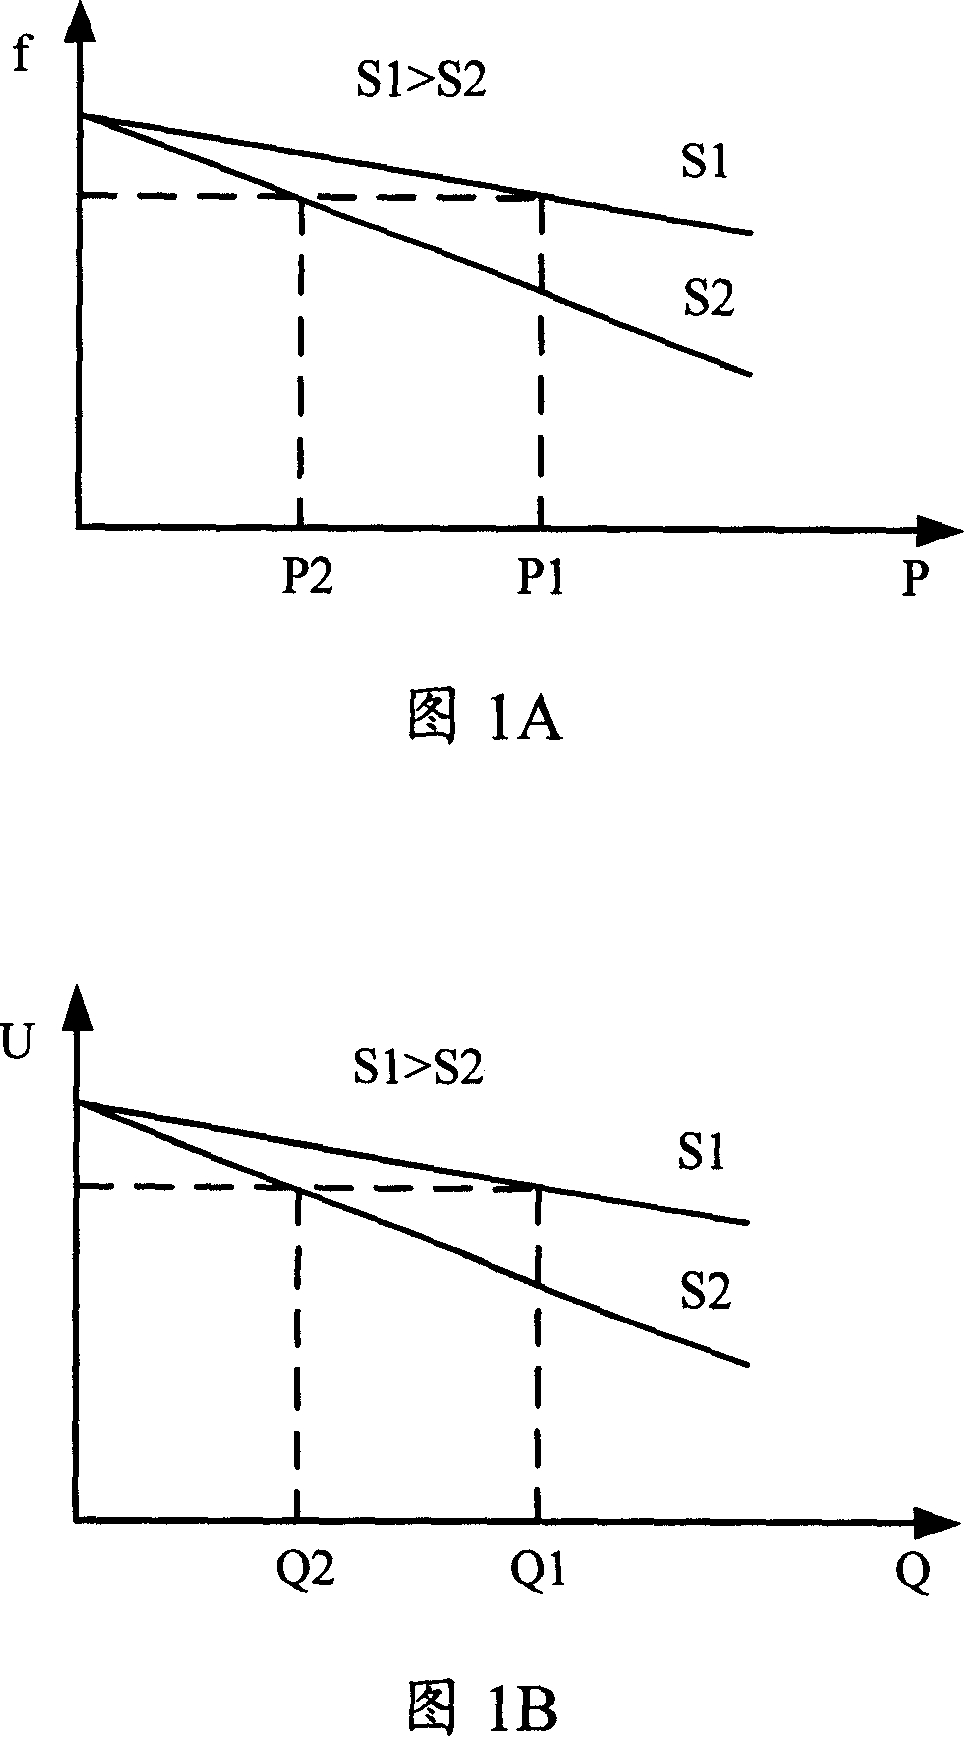 Method and system for parallel connection of UPS derated models with different capacitance grade